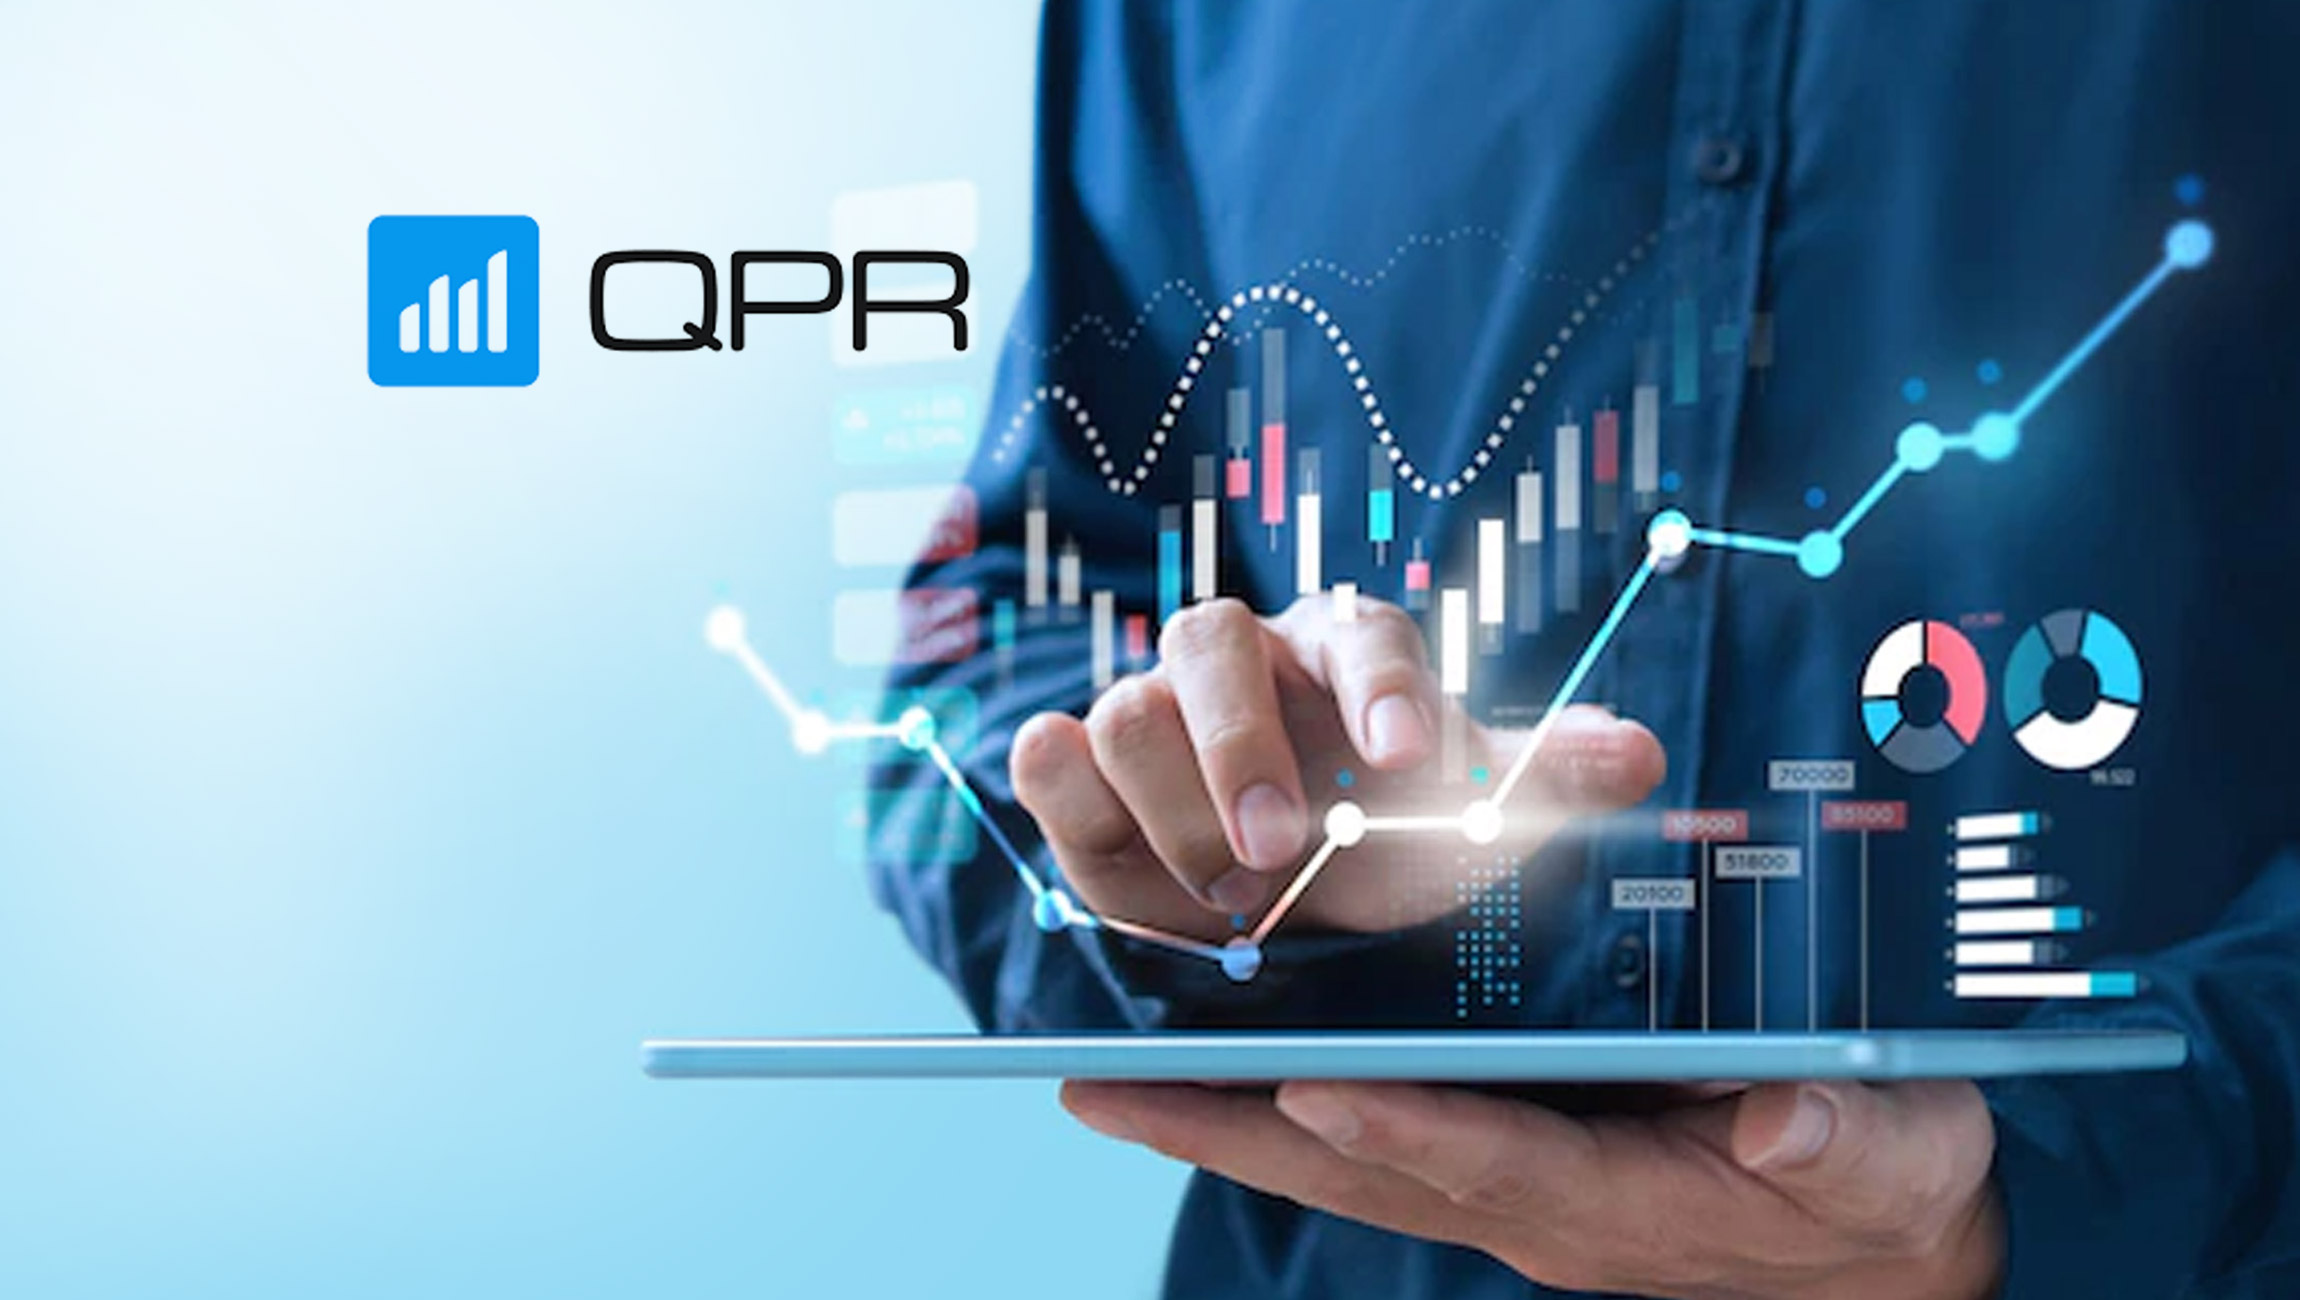 QPR-Software-announces-new-strategy-–-increased-investment-in-the-growth-of-the-Process-Mining-SaaS-Business-internationally-and-creating-new-ecosystems